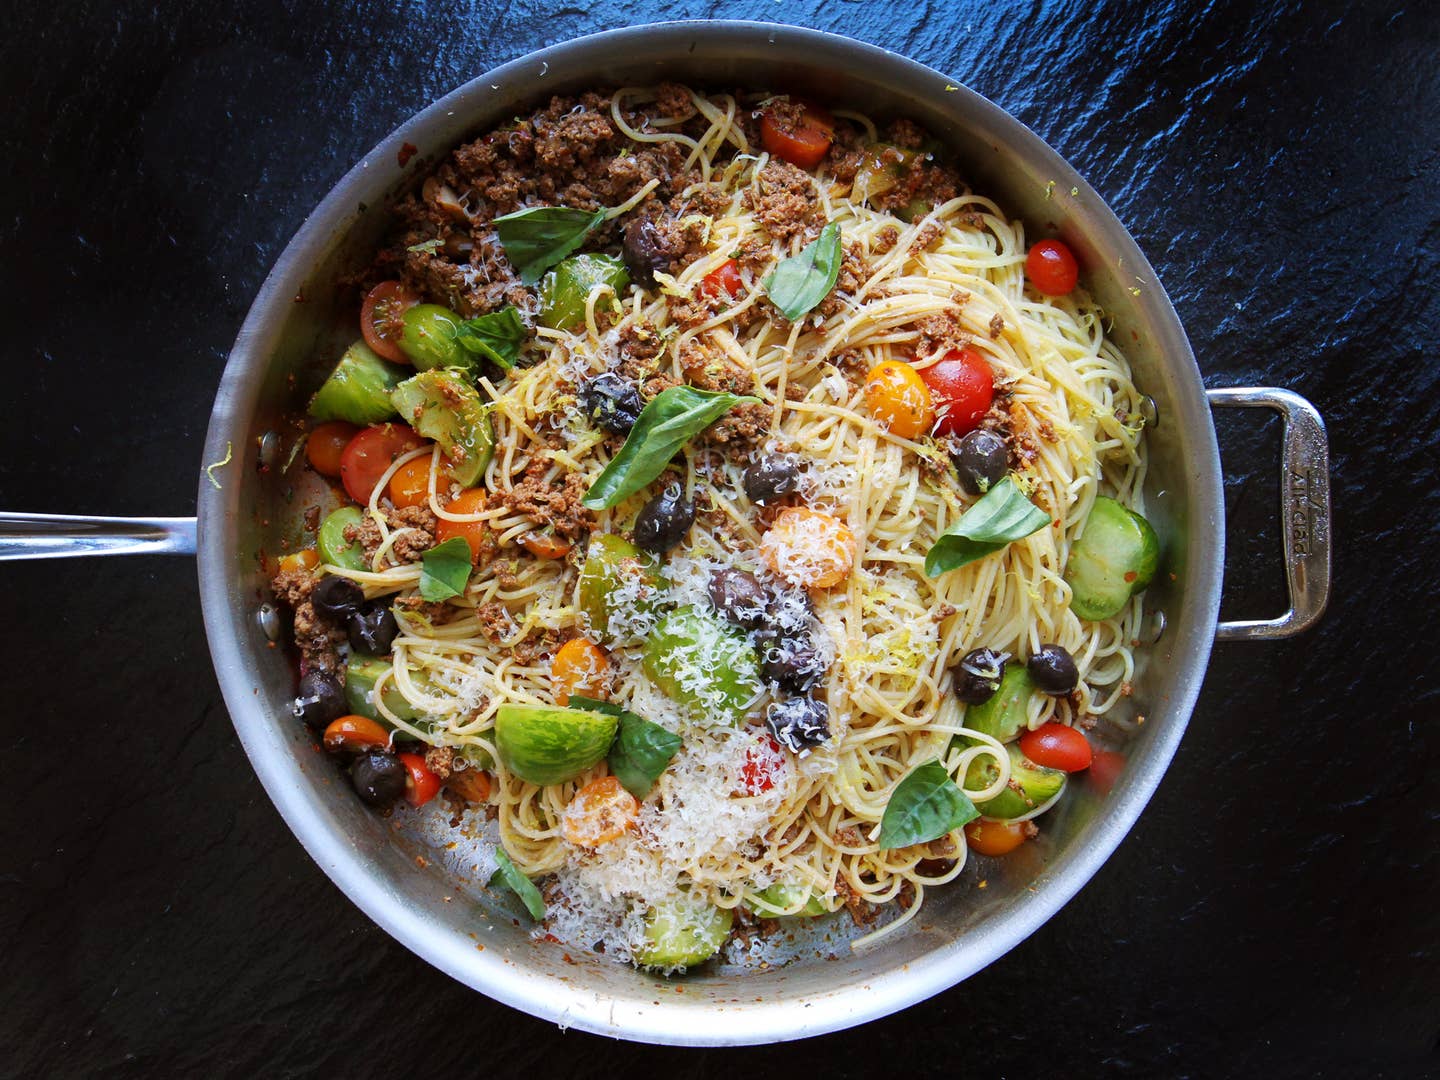 We’re Holding On To Summer With This Pasta